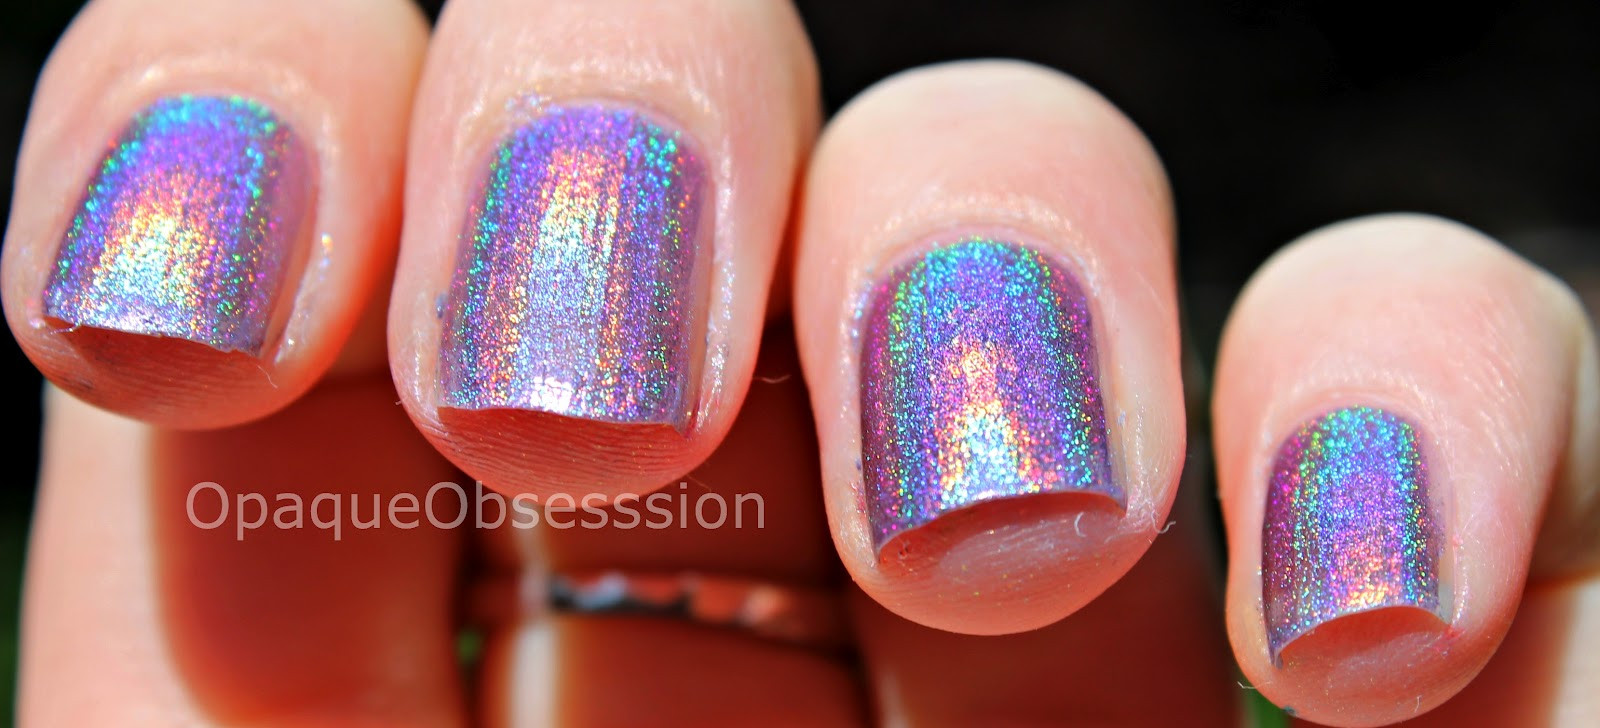 Most Beautiful Nails
 OpaqueObsesssion The Most Beautiful Nail Polish You Will